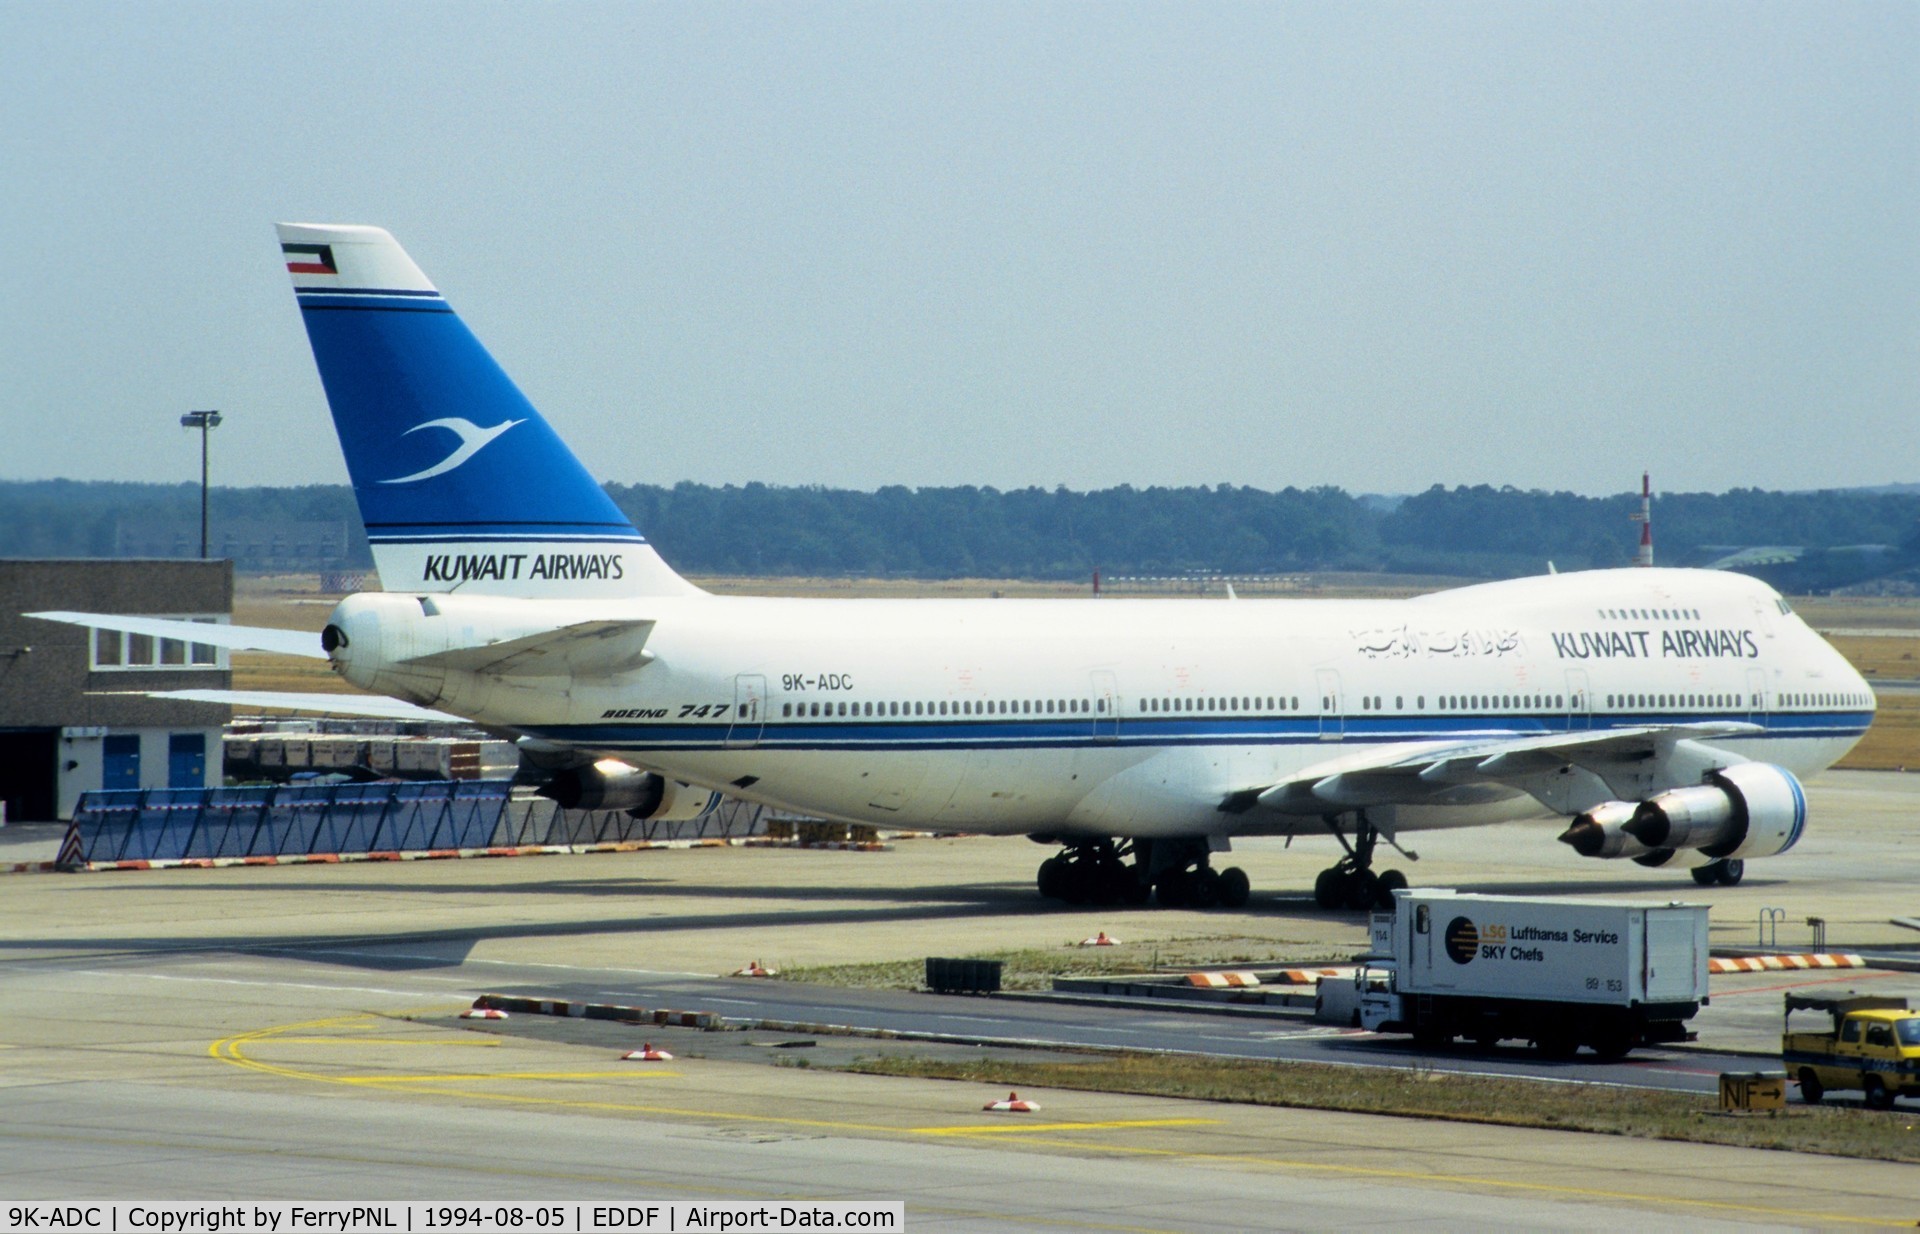 9K-ADC, 1979 Boeing 747-269B C/N 21543, Kuwait B742 taxiing out